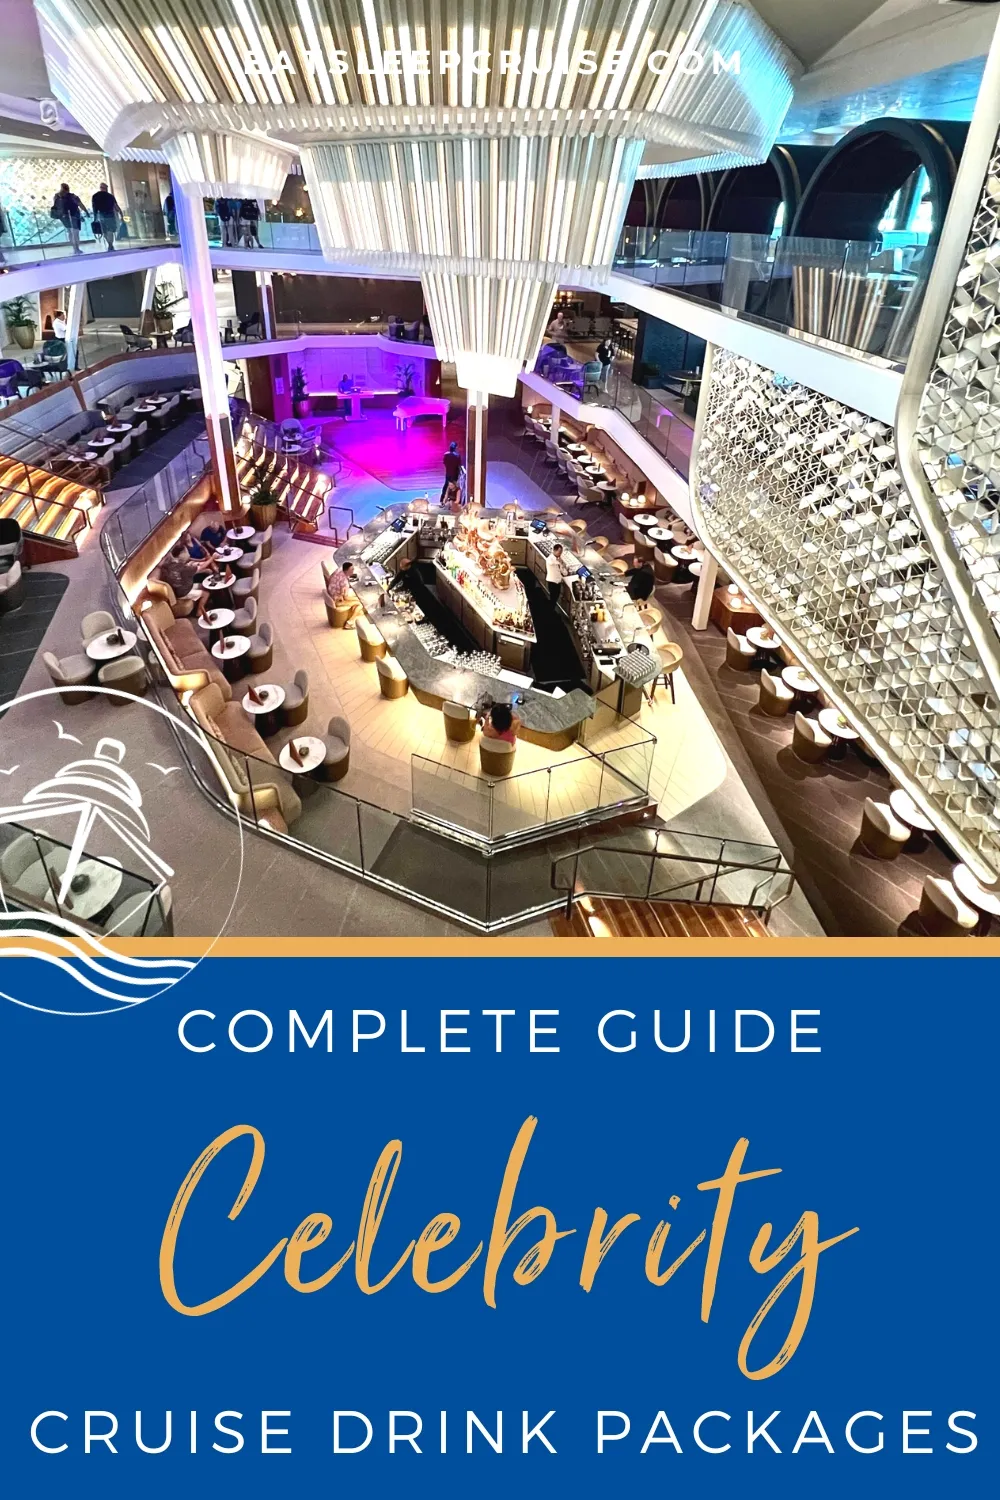 Drink Packages on Celebrity Cruises